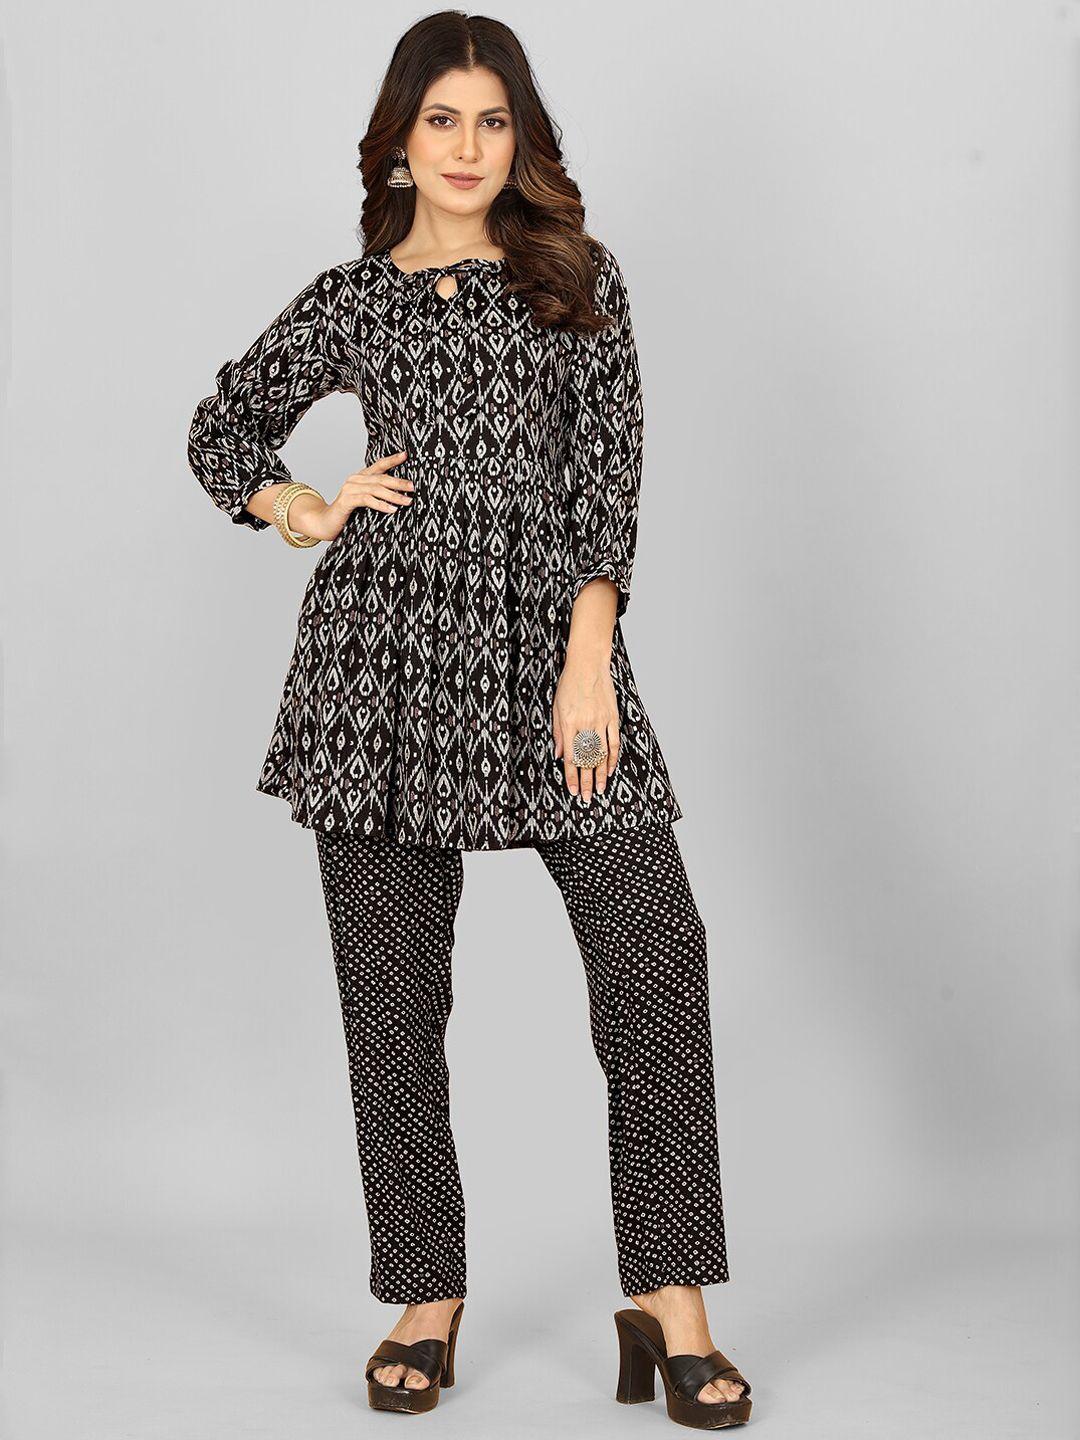 lilots printed tunic & trousers co-ords